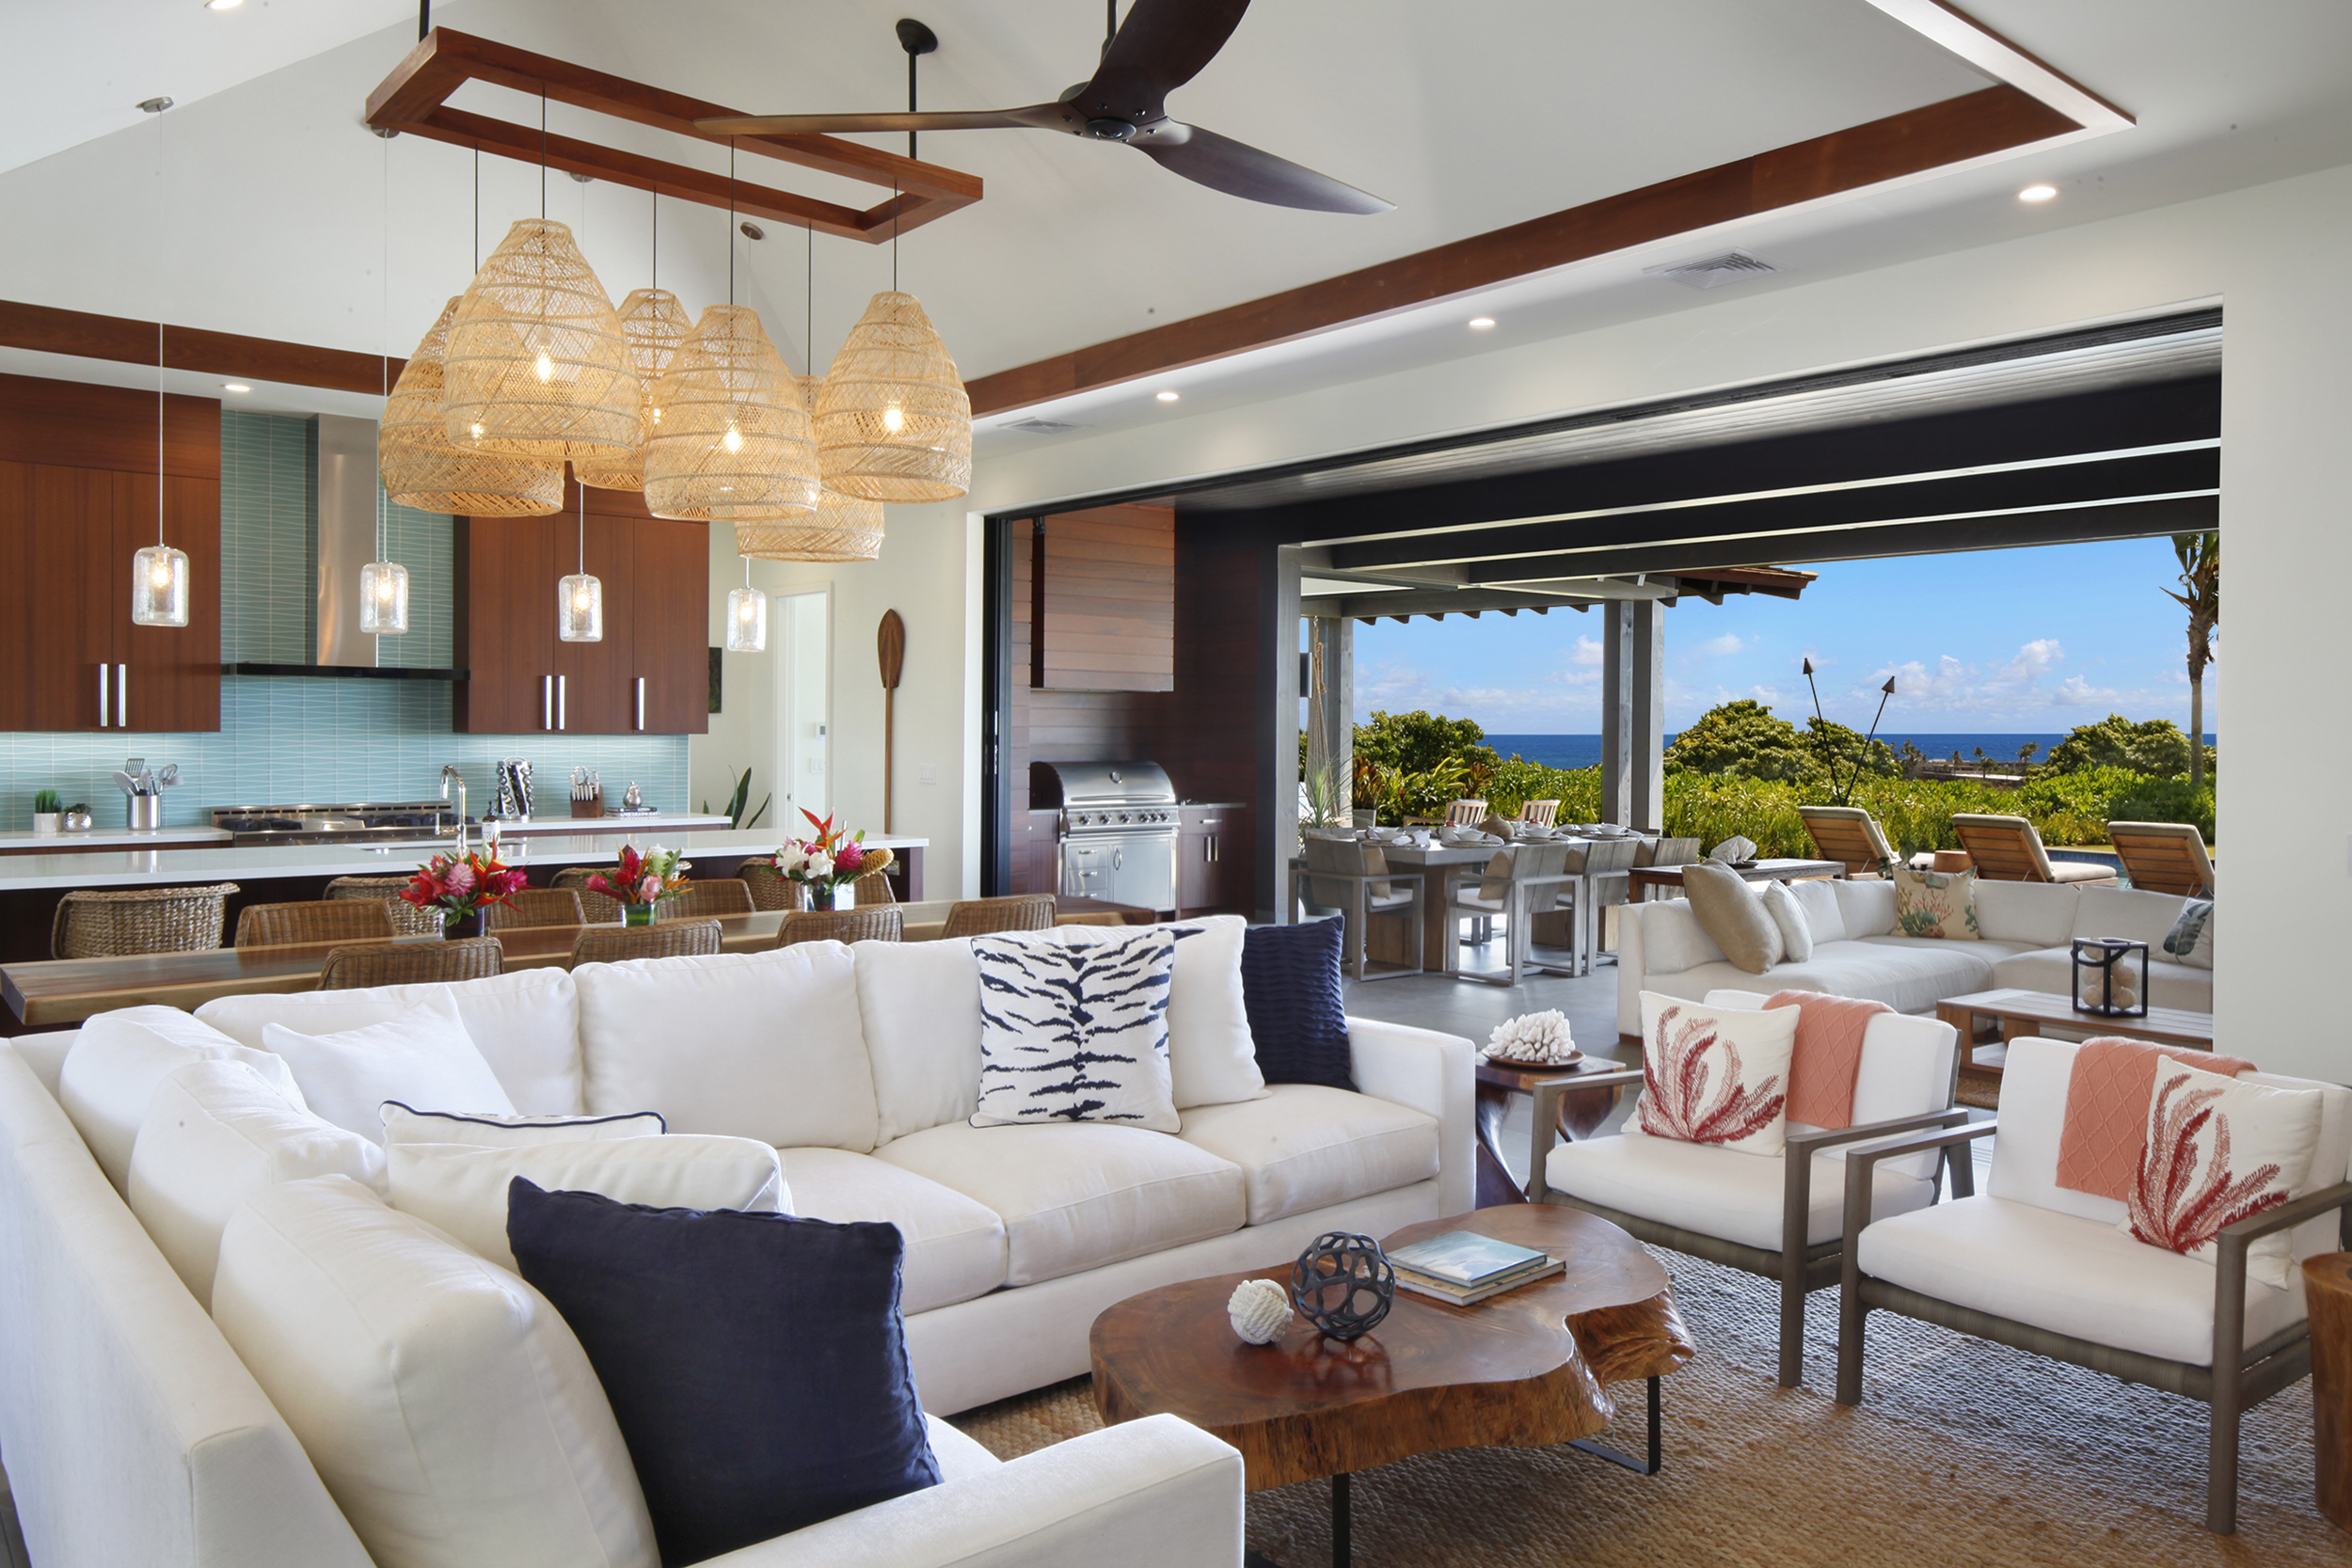 Living room / outdoor living space with ocean views